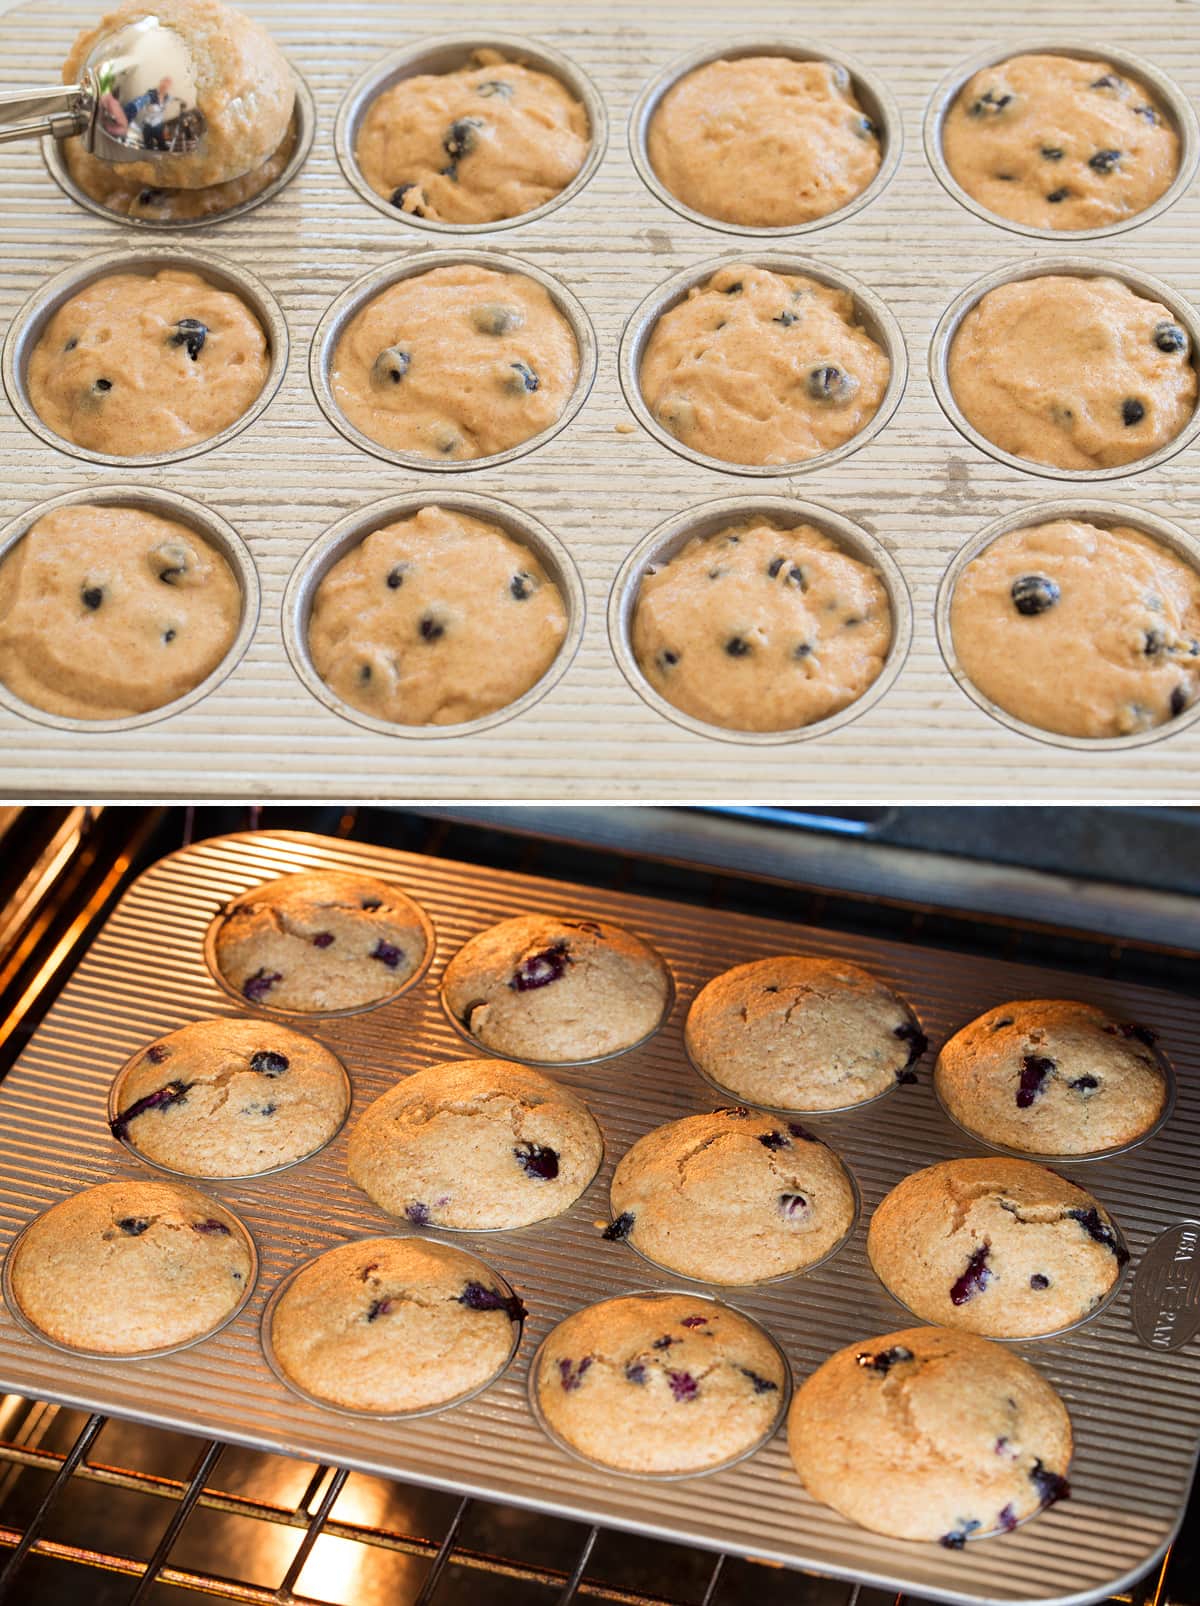 Muffins shown in pan before and after baking in oven.